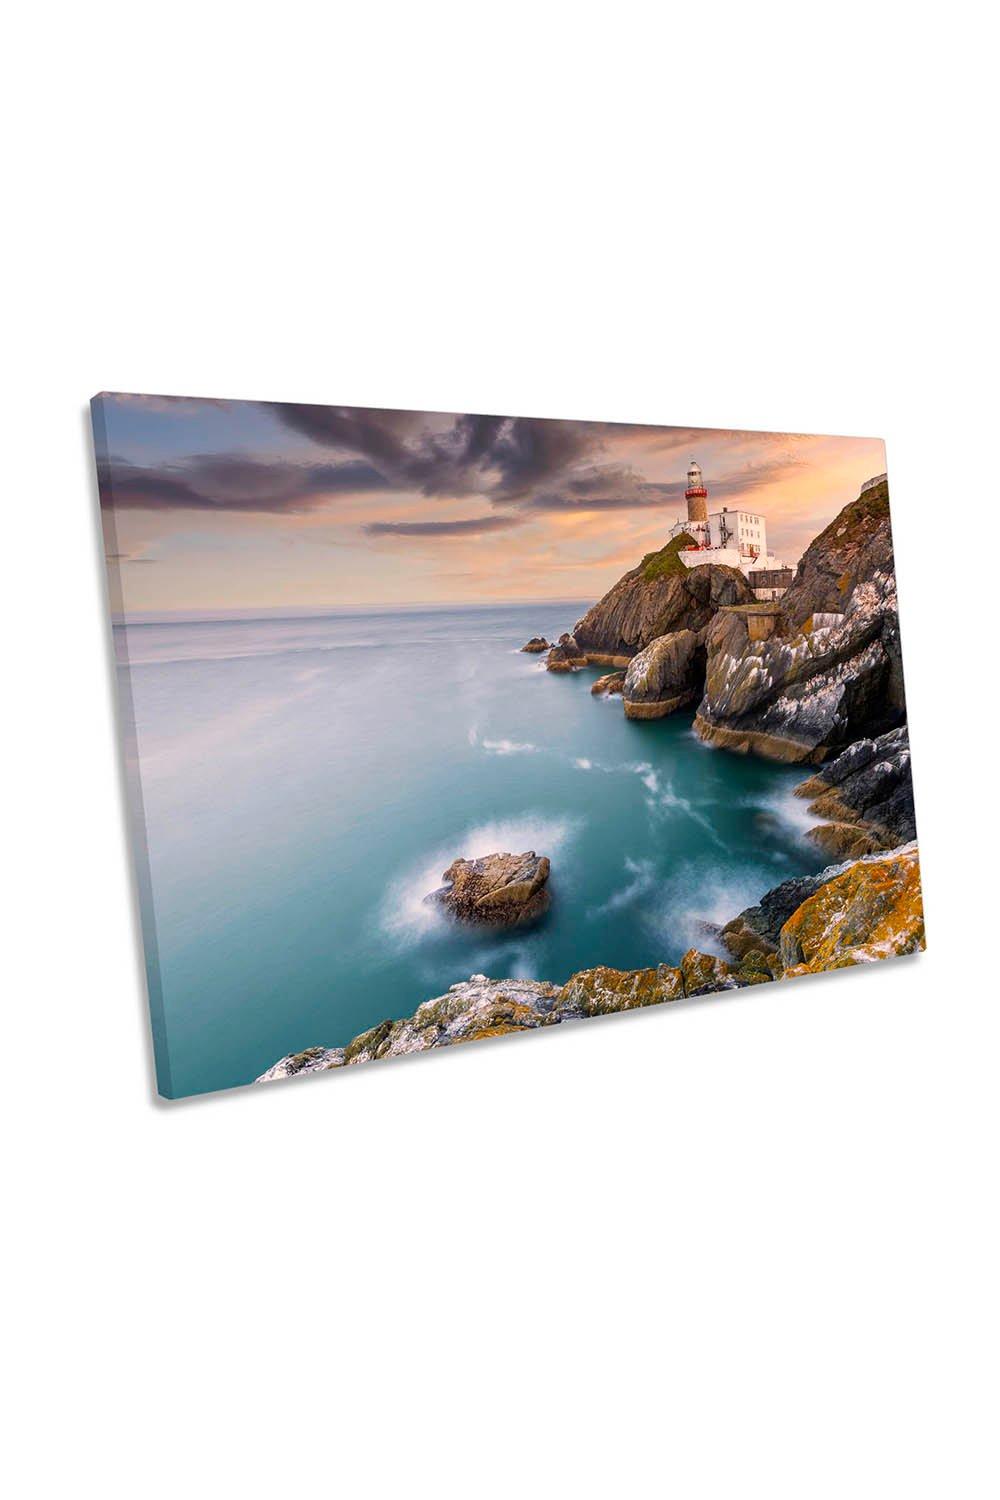 The Baily Lighthouse Dublin Ireland Canvas Wall Art Picture Print